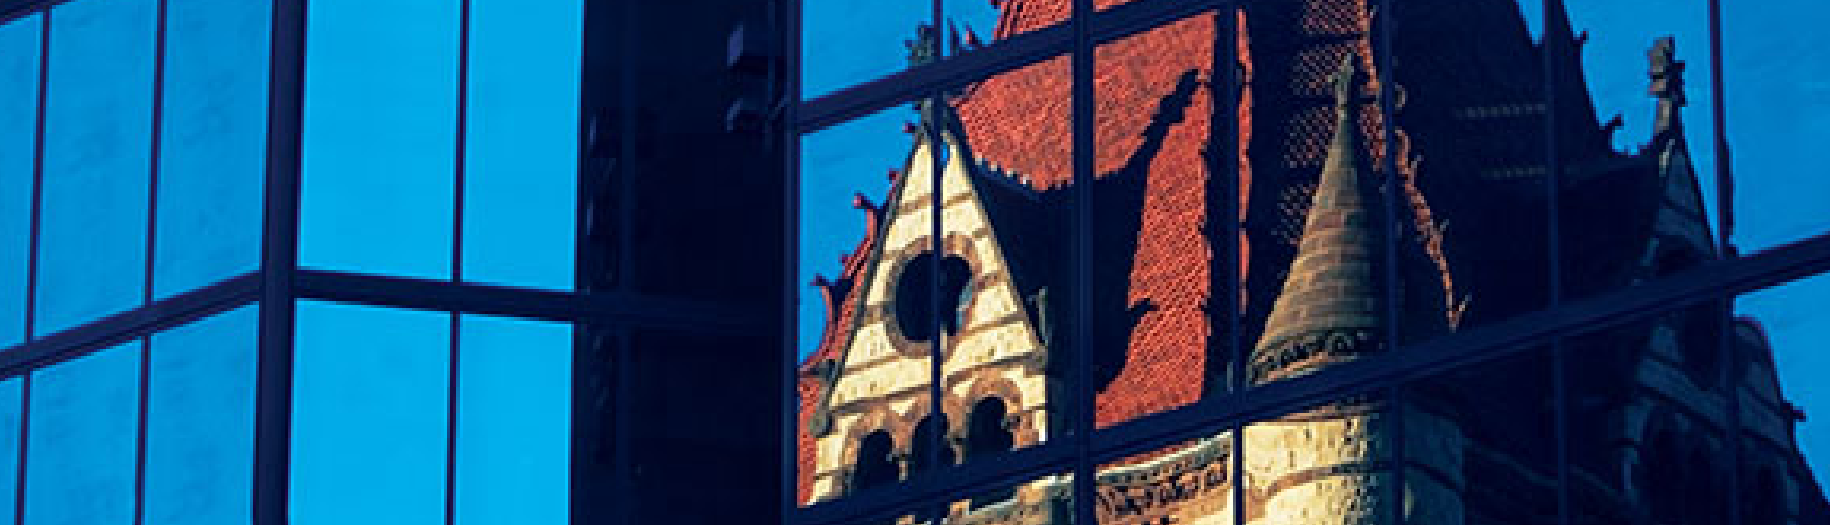 An old, Gothic-style building reflected in the windows of a new office building